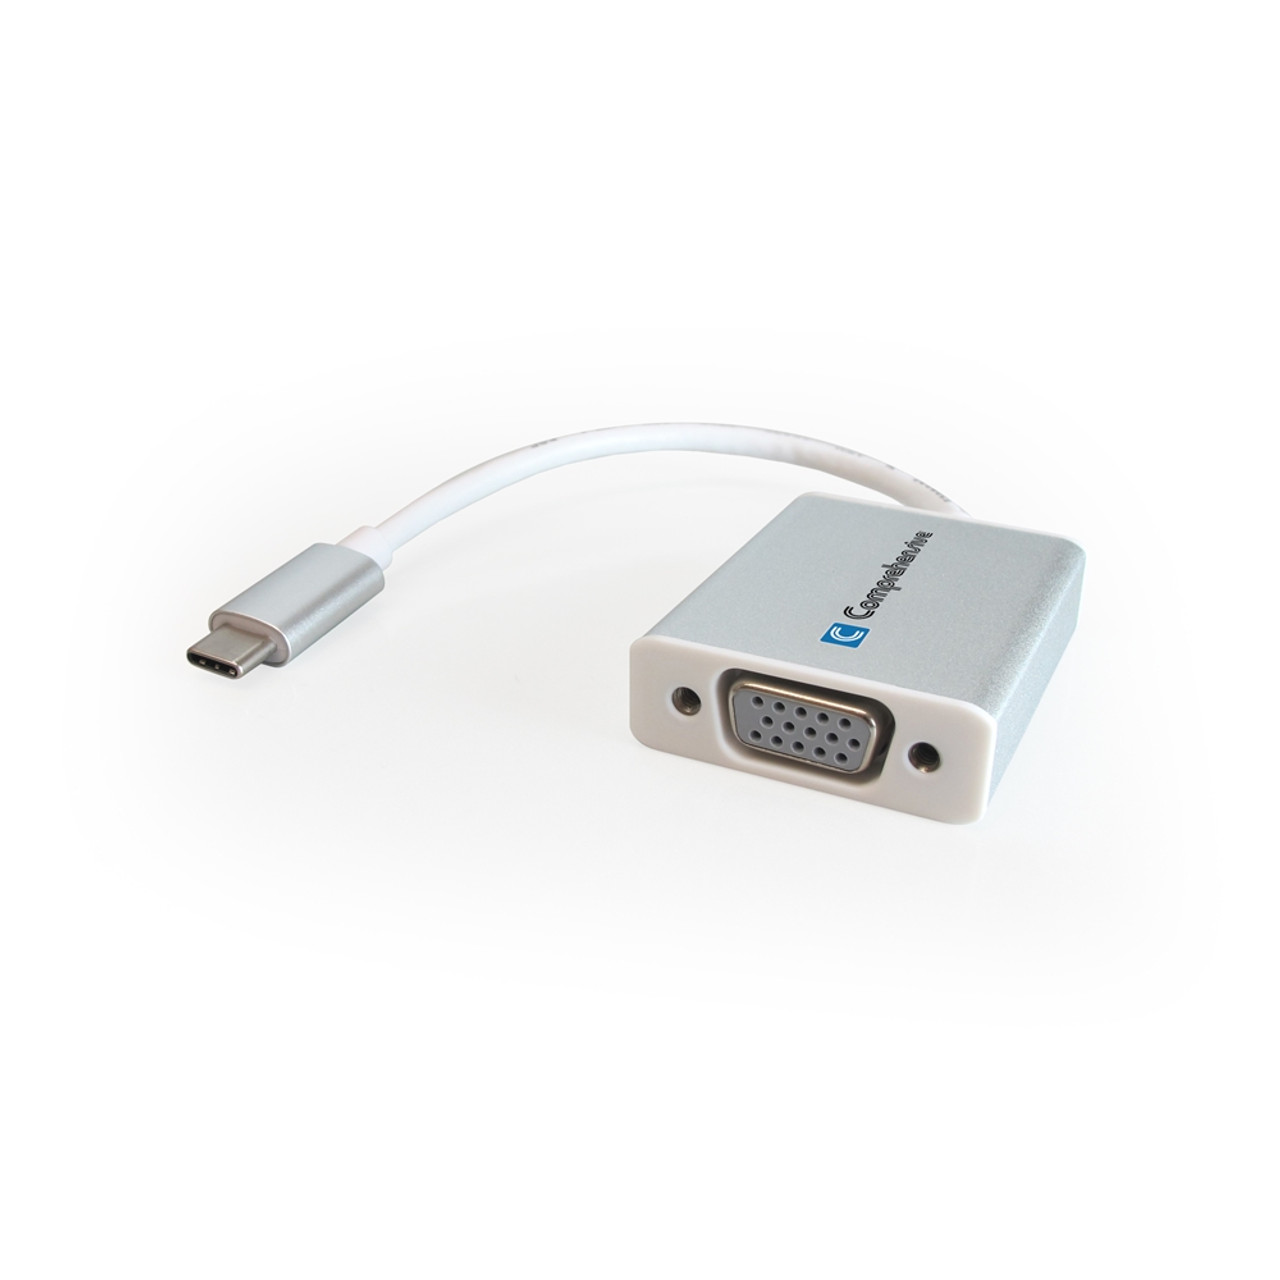 USB 3.1 Type-C male to VGA female cable adapter